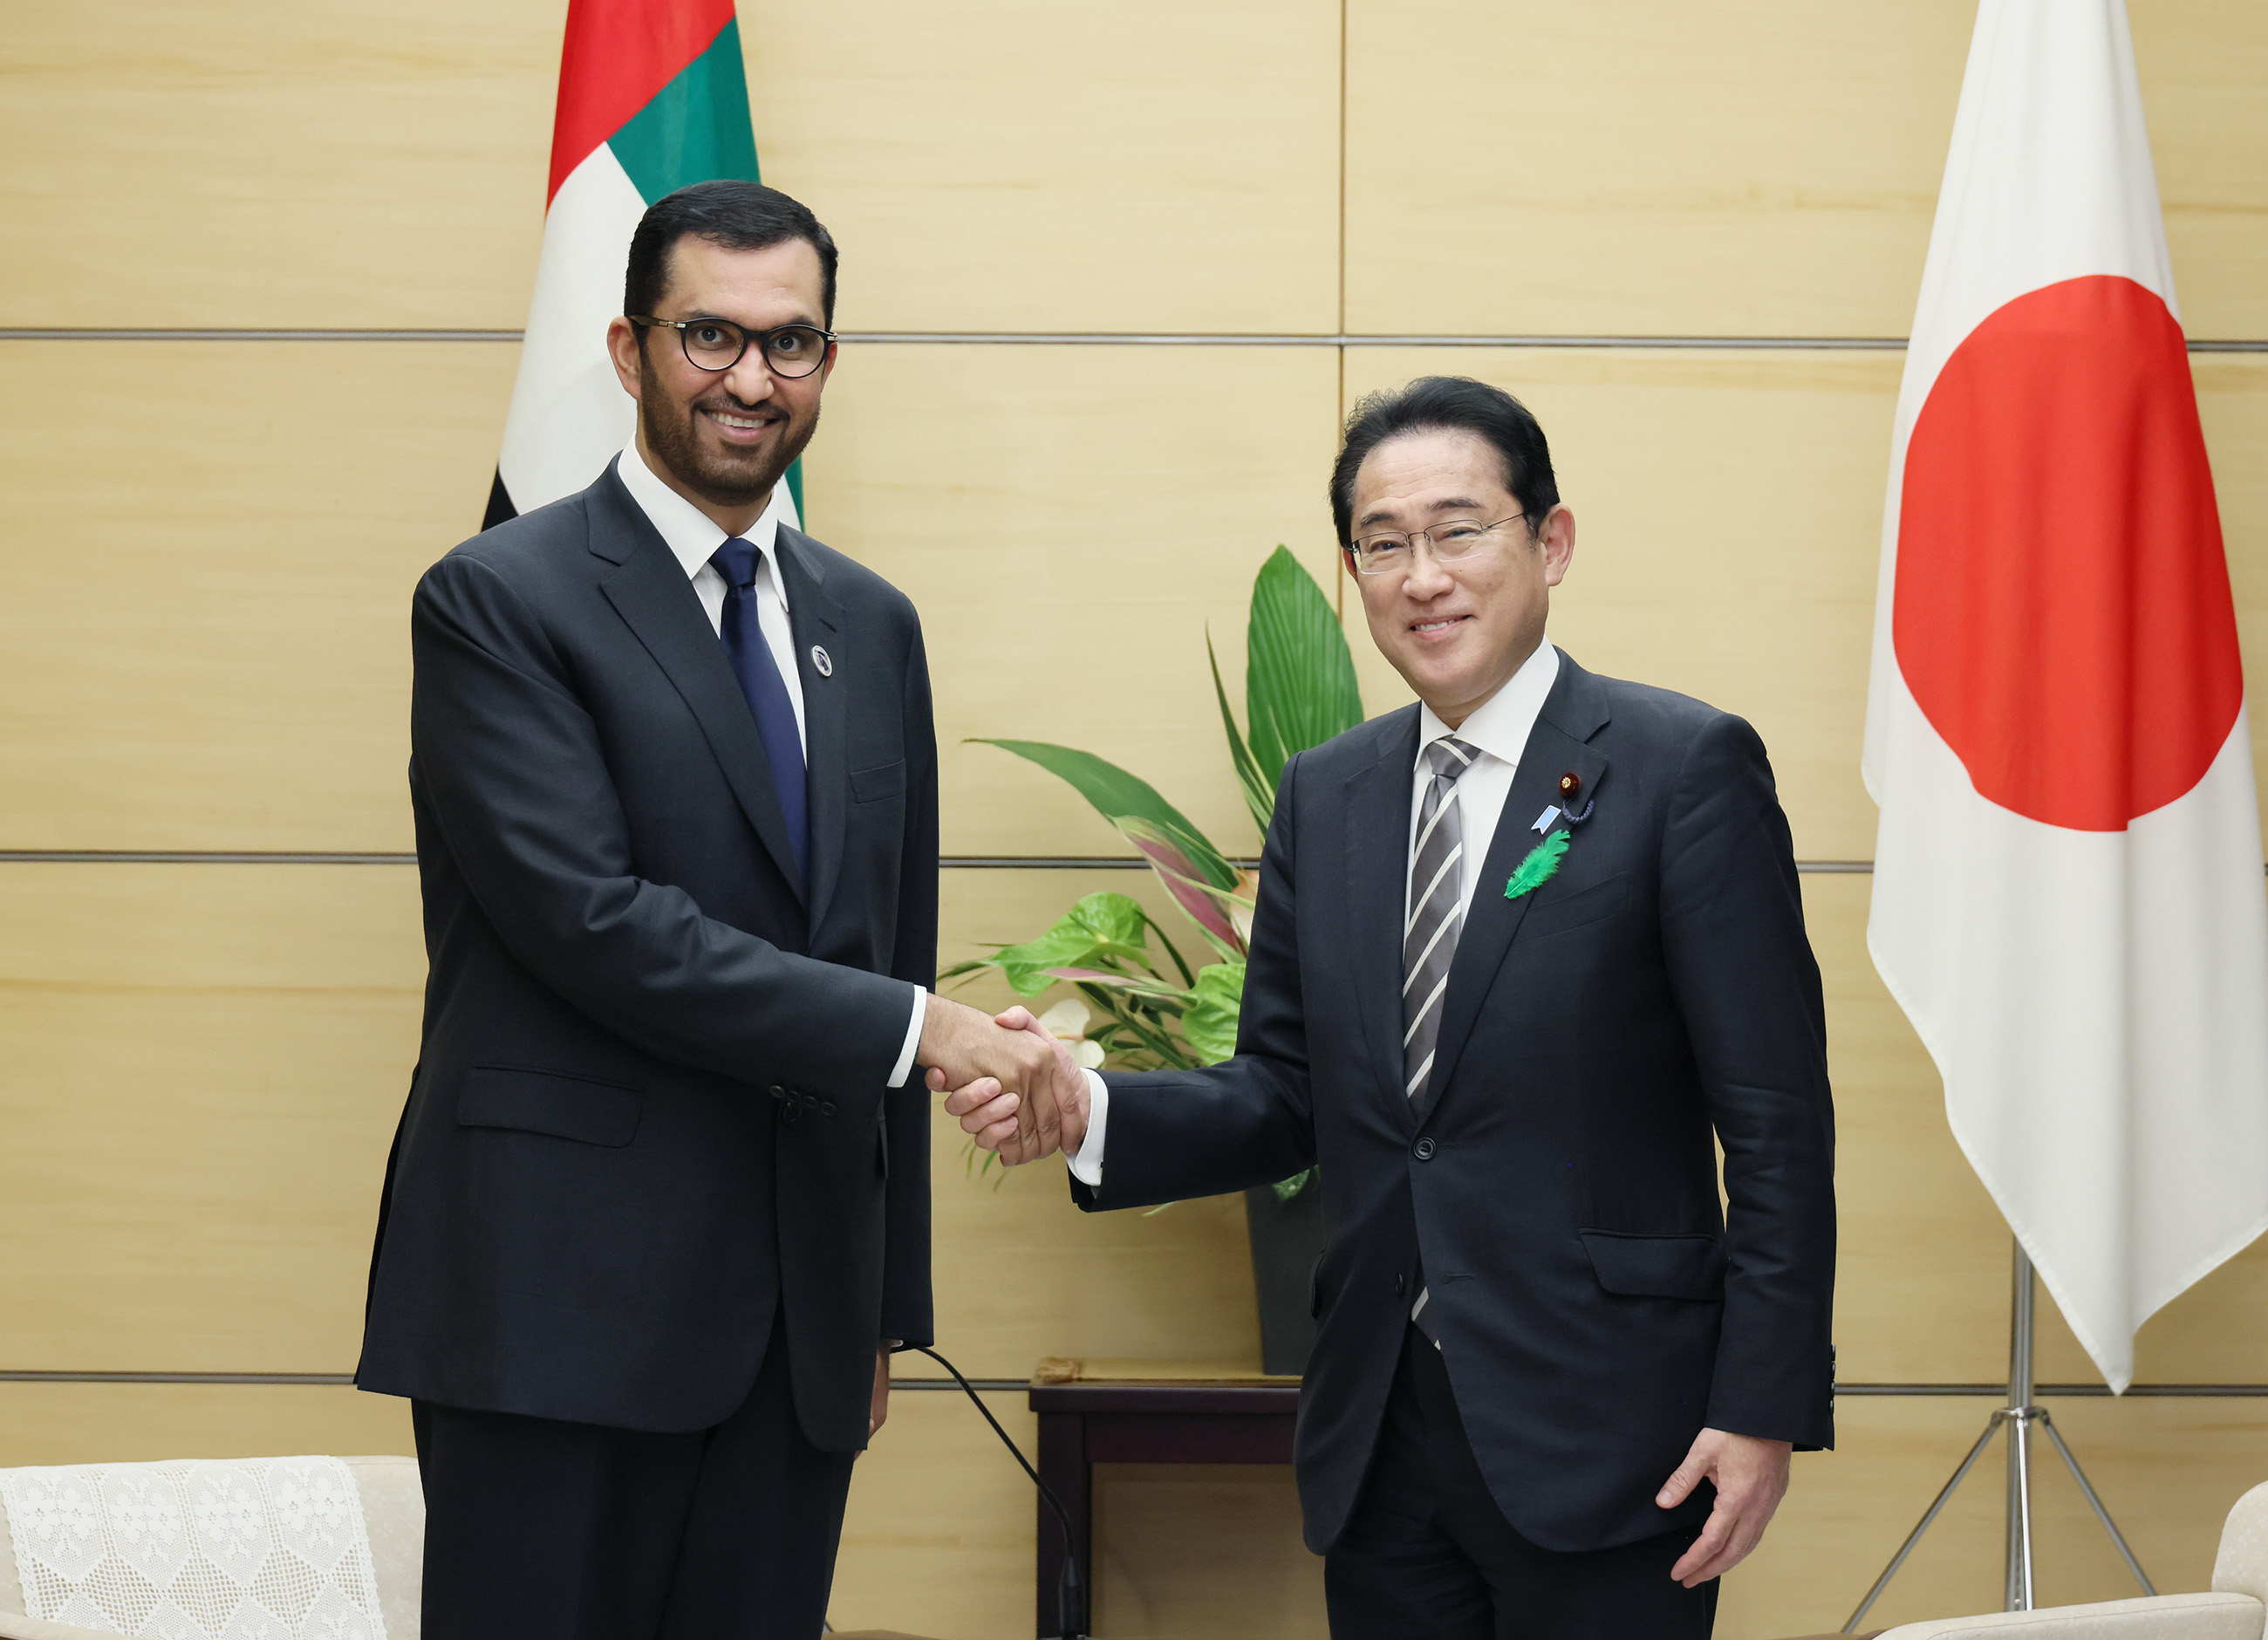 Courtesy Call from Minister of Industry and Advanced Technology and Special Envoy to Japan Sultan Al Jaber of the United Arab Emirates